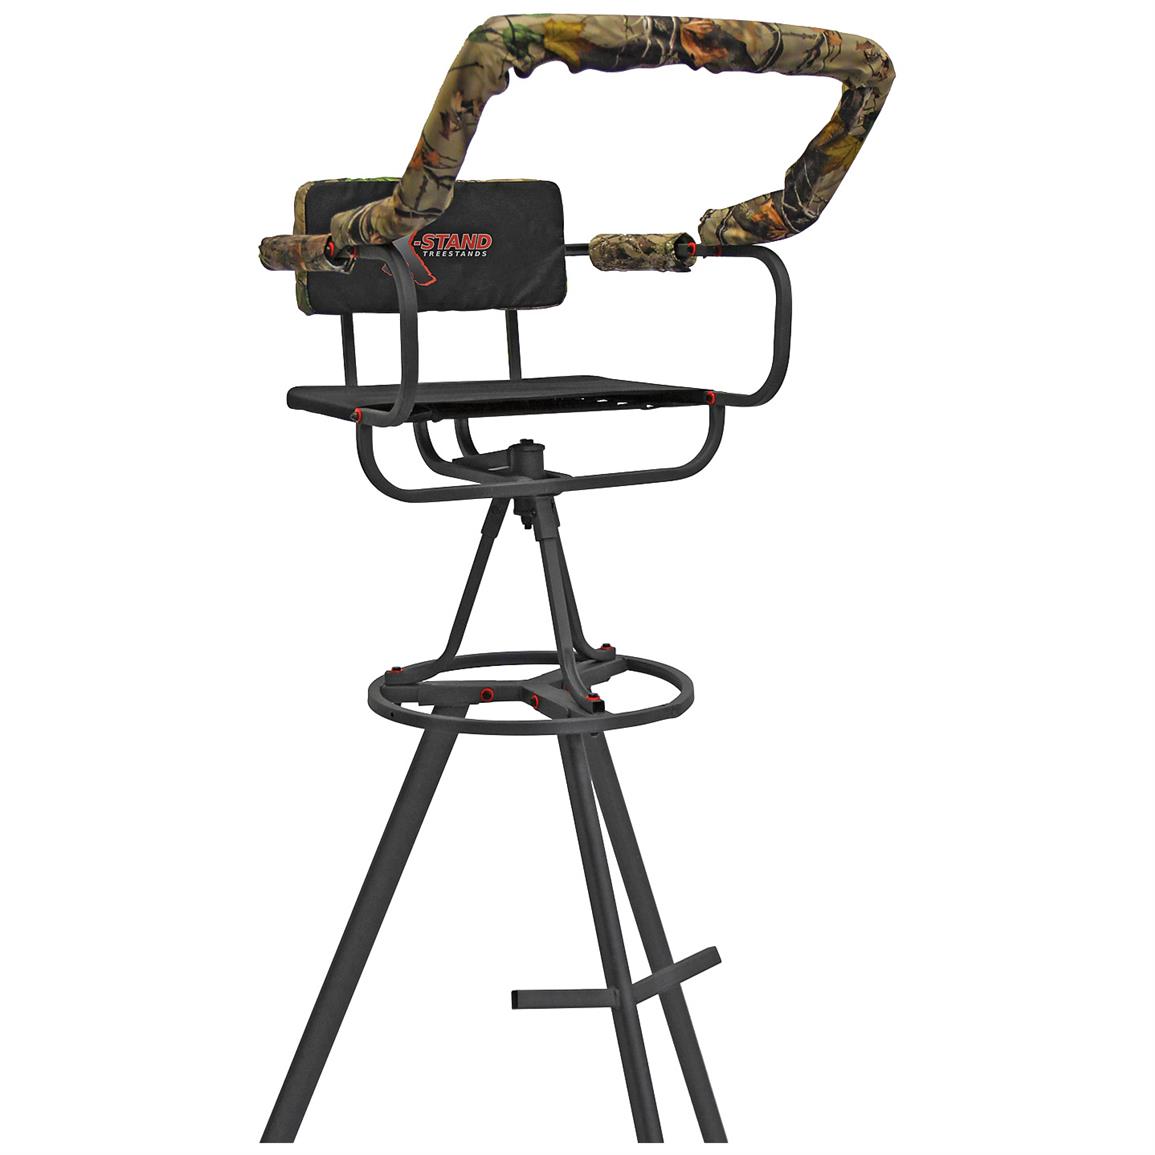 X-Stand Express 11' Portable Tripod Deer Stand